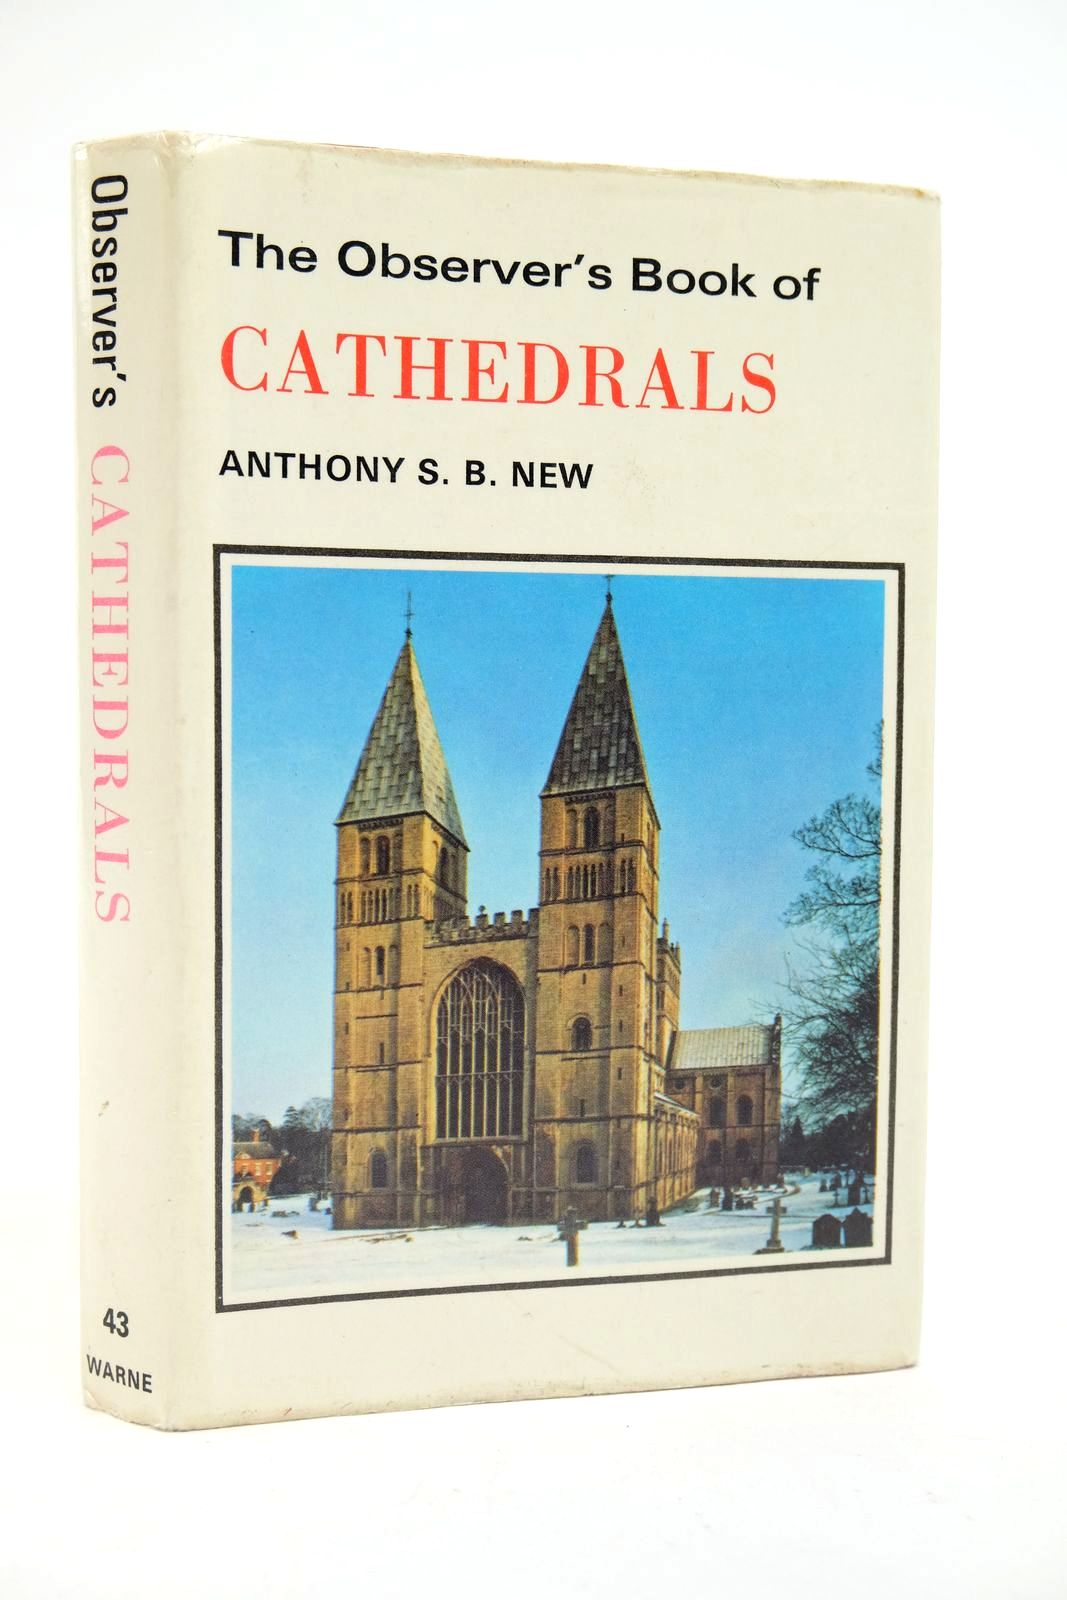 Photo of THE OBSERVER'S BOOK OF CATHEDRALS written by New, Anthony S.B. published by Frederick Warne & Co Ltd. (STOCK CODE: 2139500)  for sale by Stella & Rose's Books